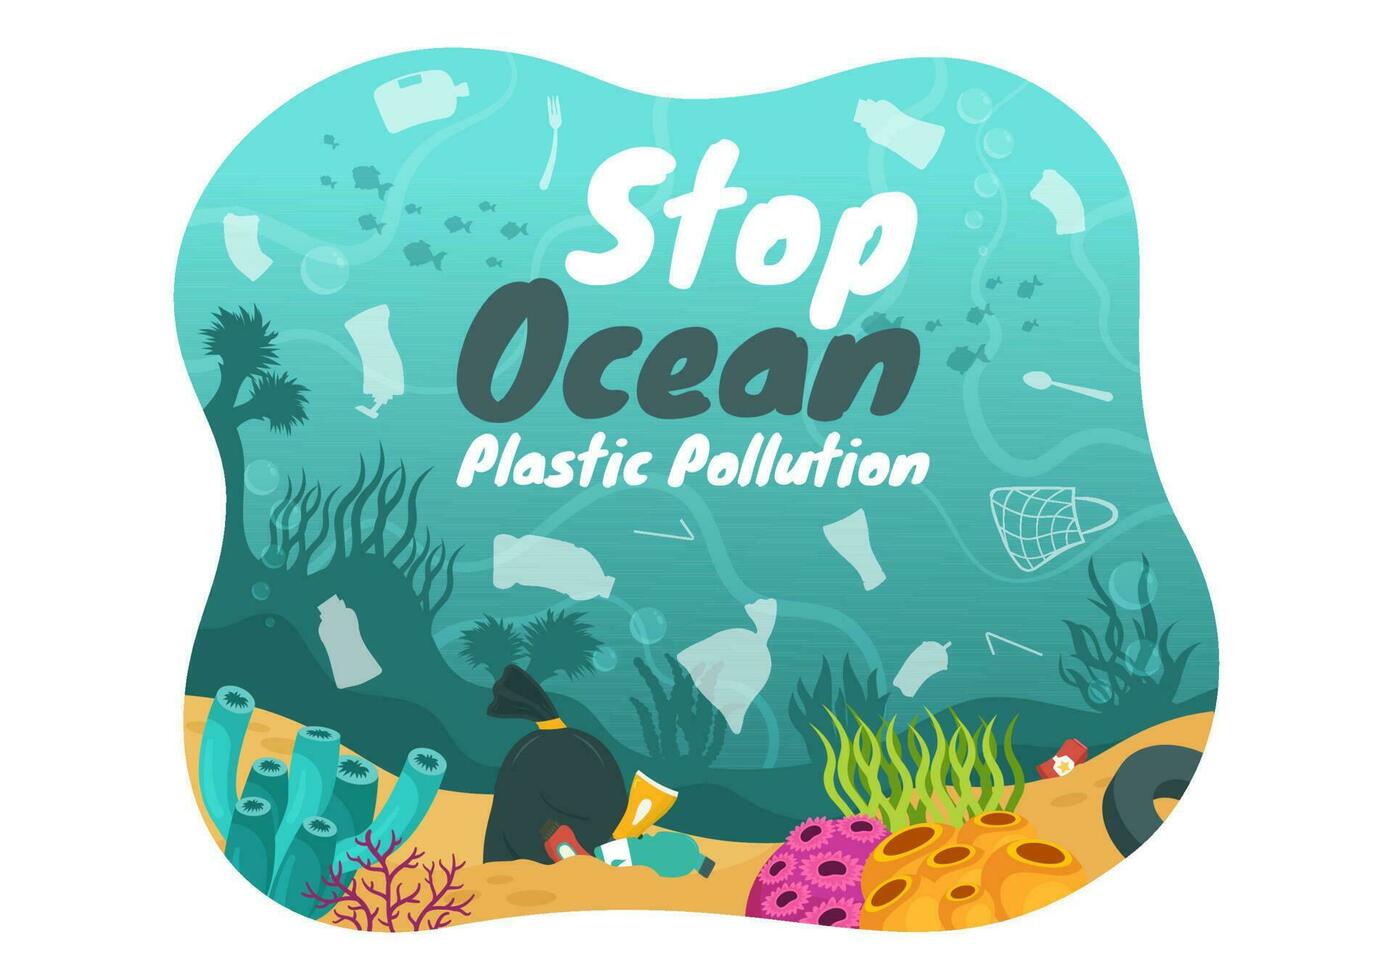 Stop Ocean Plastic Pollution Vector Illustration with Trash Under the Sea like a Waste Bag, Garbage and Bottle in Flat Cartoon Hand Drawn Templates